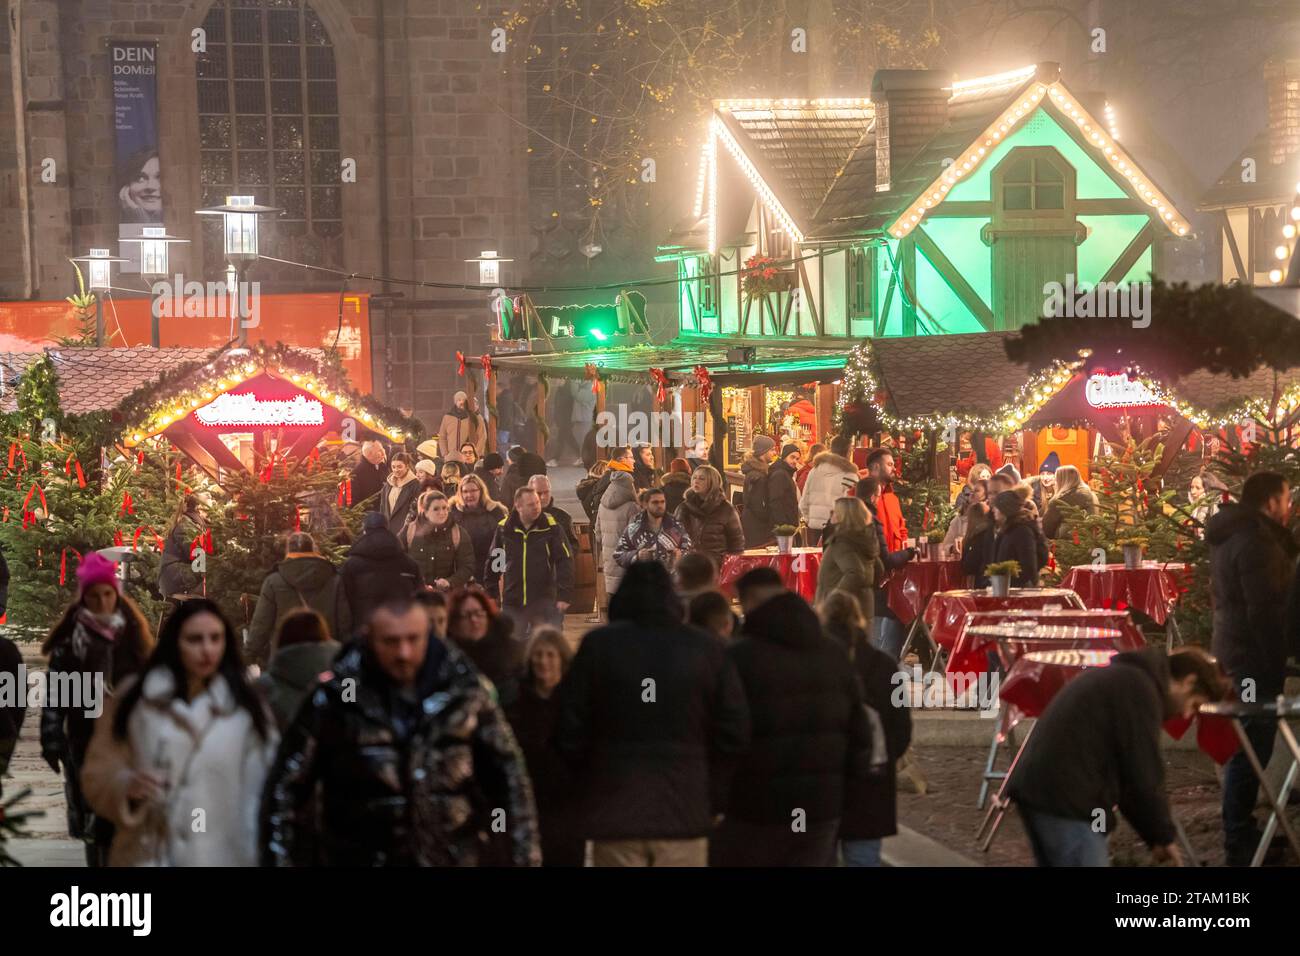 Pre-Christmas season, Christmas market in the city centre of Essen, Kettwiger Straße, food stalls, mulled wine stands, NRW, Germany, Stock Photo